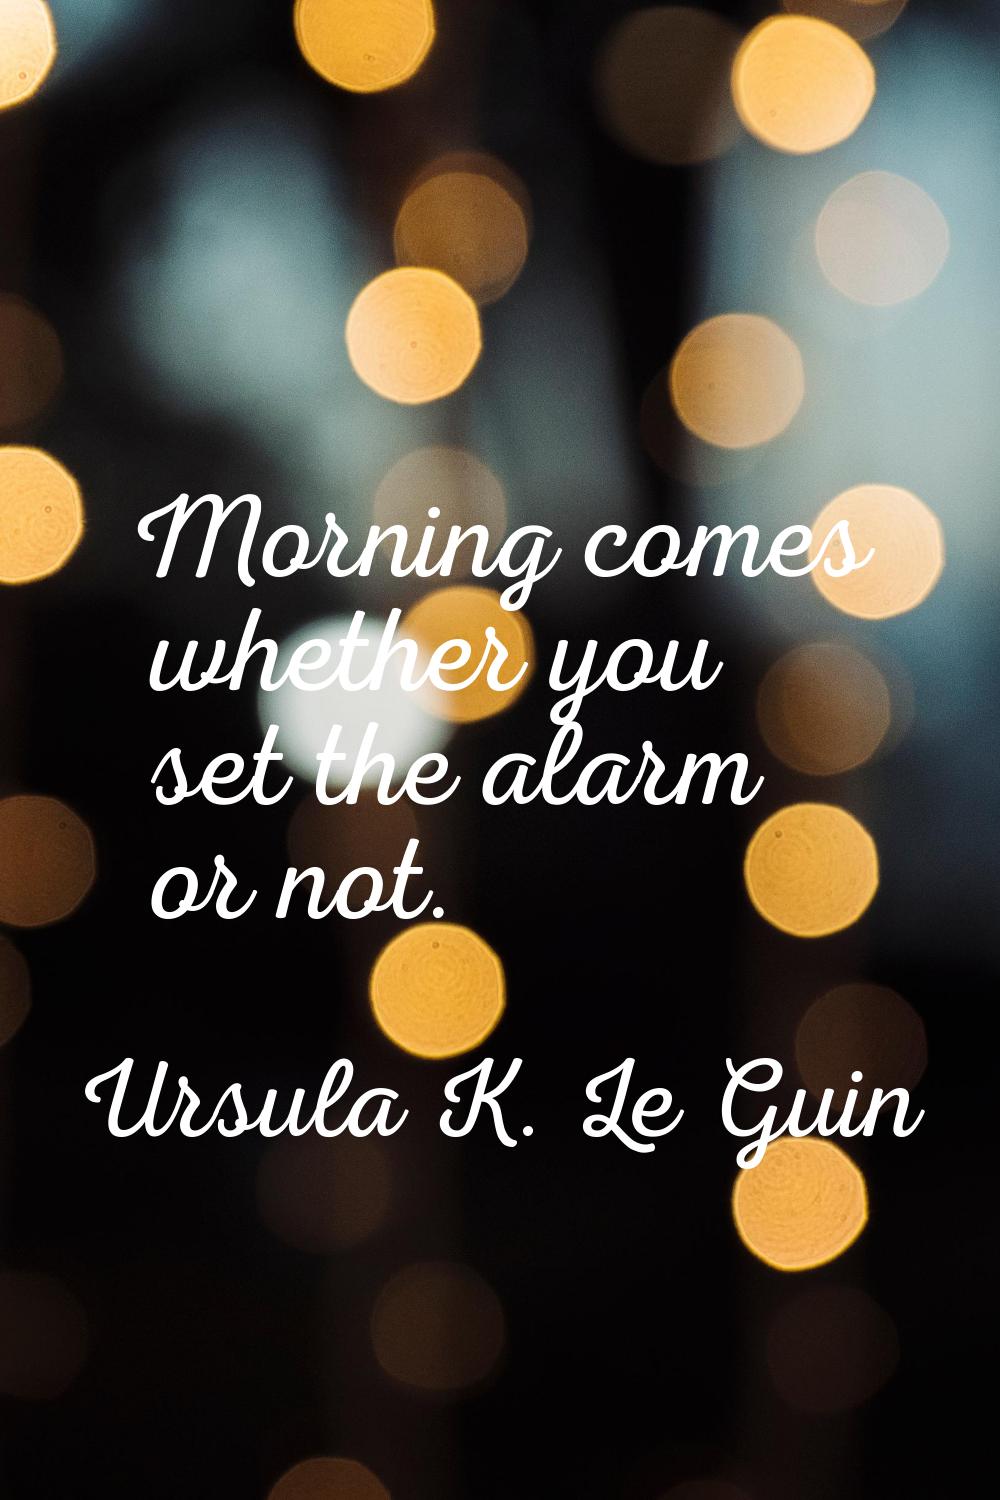 Morning comes whether you set the alarm or not.